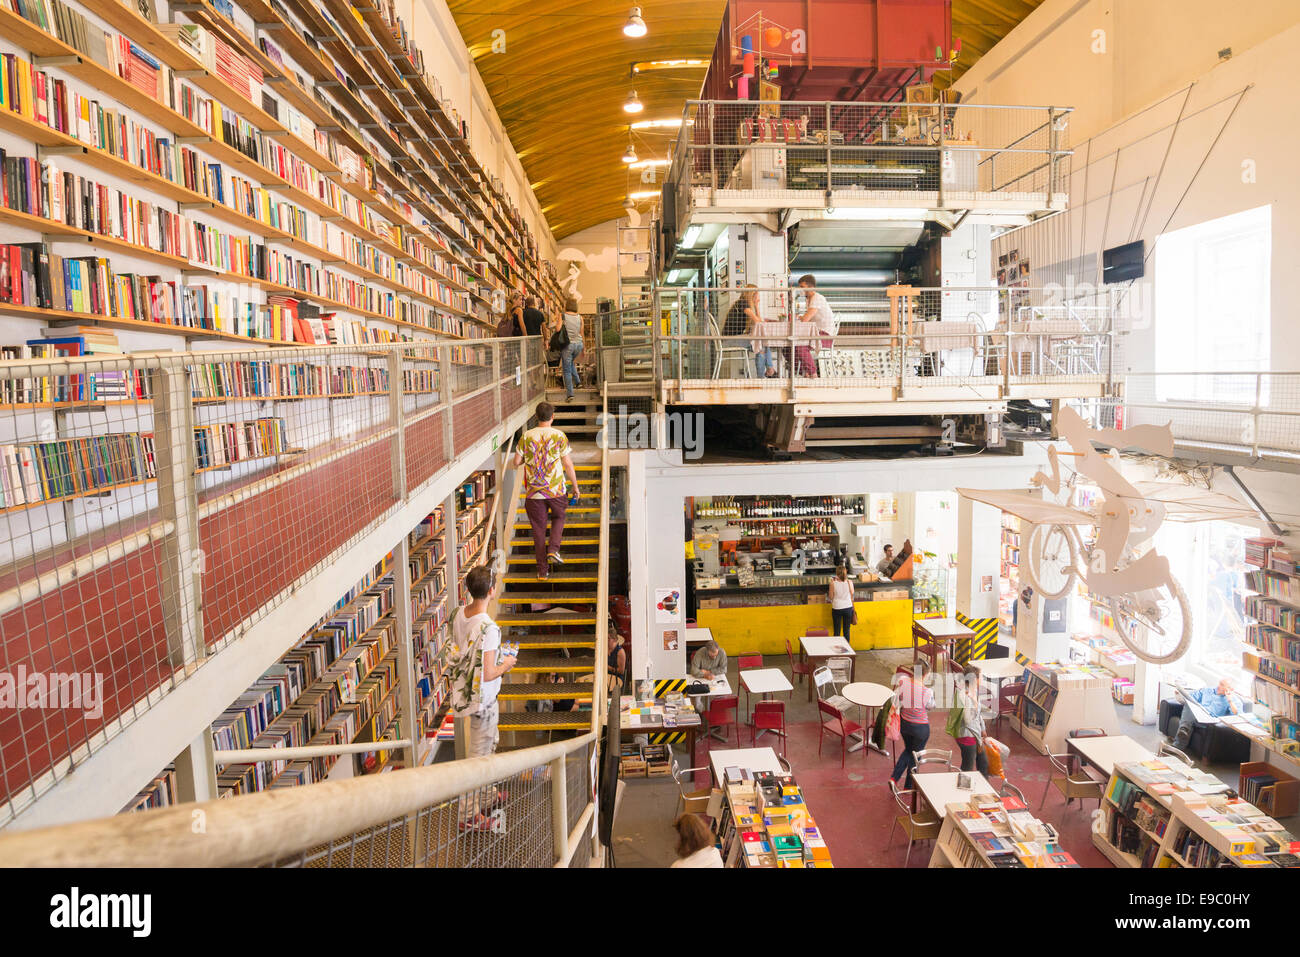 A former printing space gave life to a bookstore in the lx factory,lisboa, portugal. Stock Photo